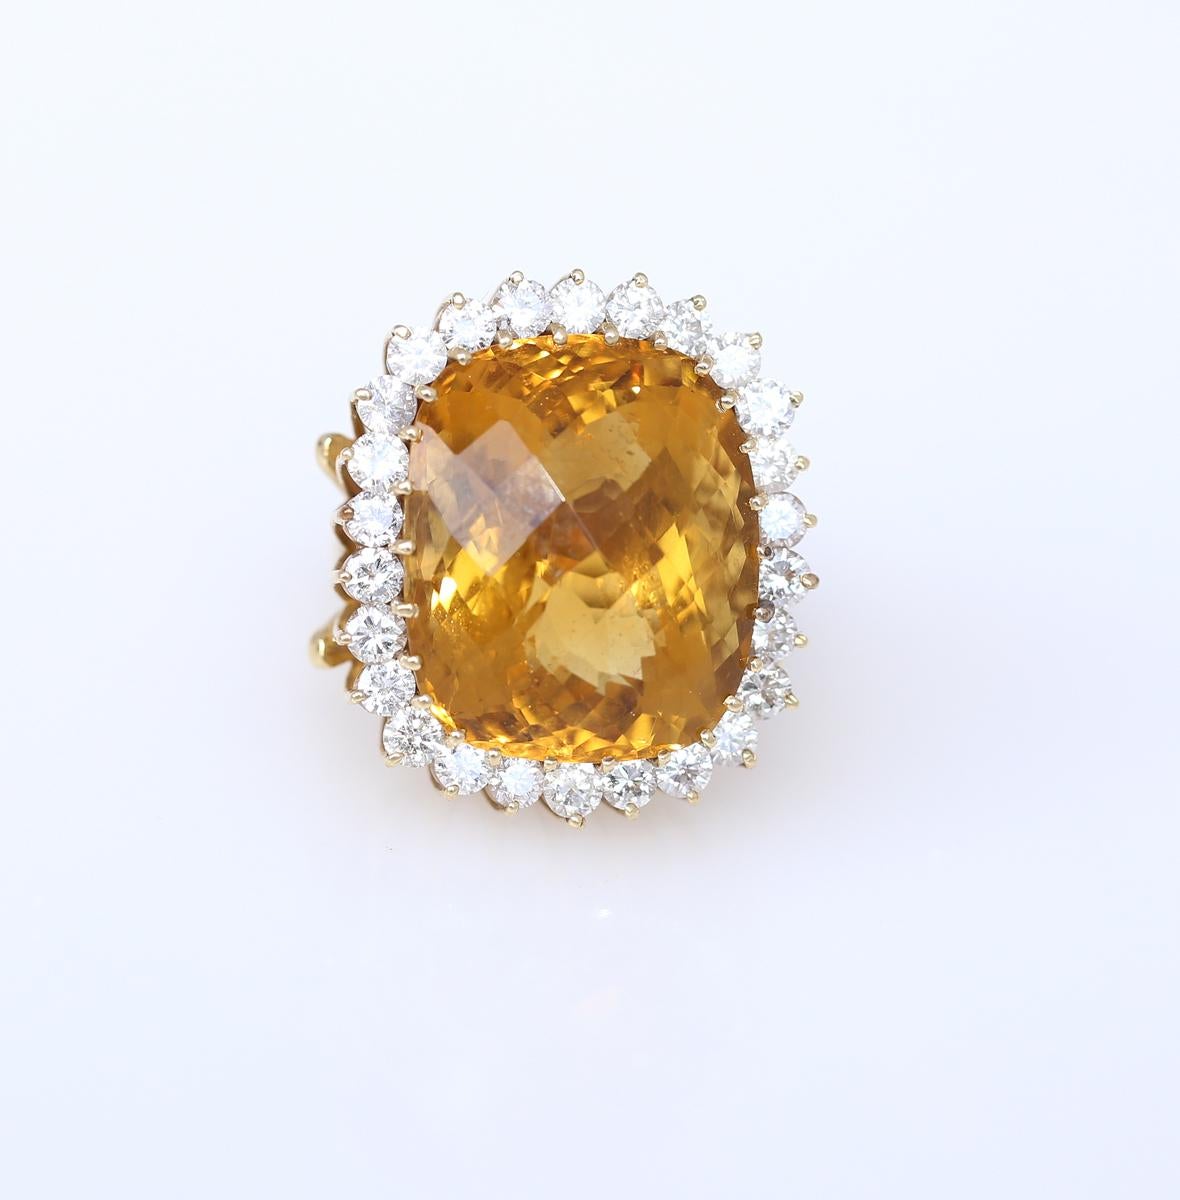 Fine and bright Citrine of 30 Carats and 1 Carat of fine diamonds surrounding the centre stone form a magnificent ring. The spectacular massive ring will grab attention at any occasion, cocktail party or gala. It is a great example of the 80es era